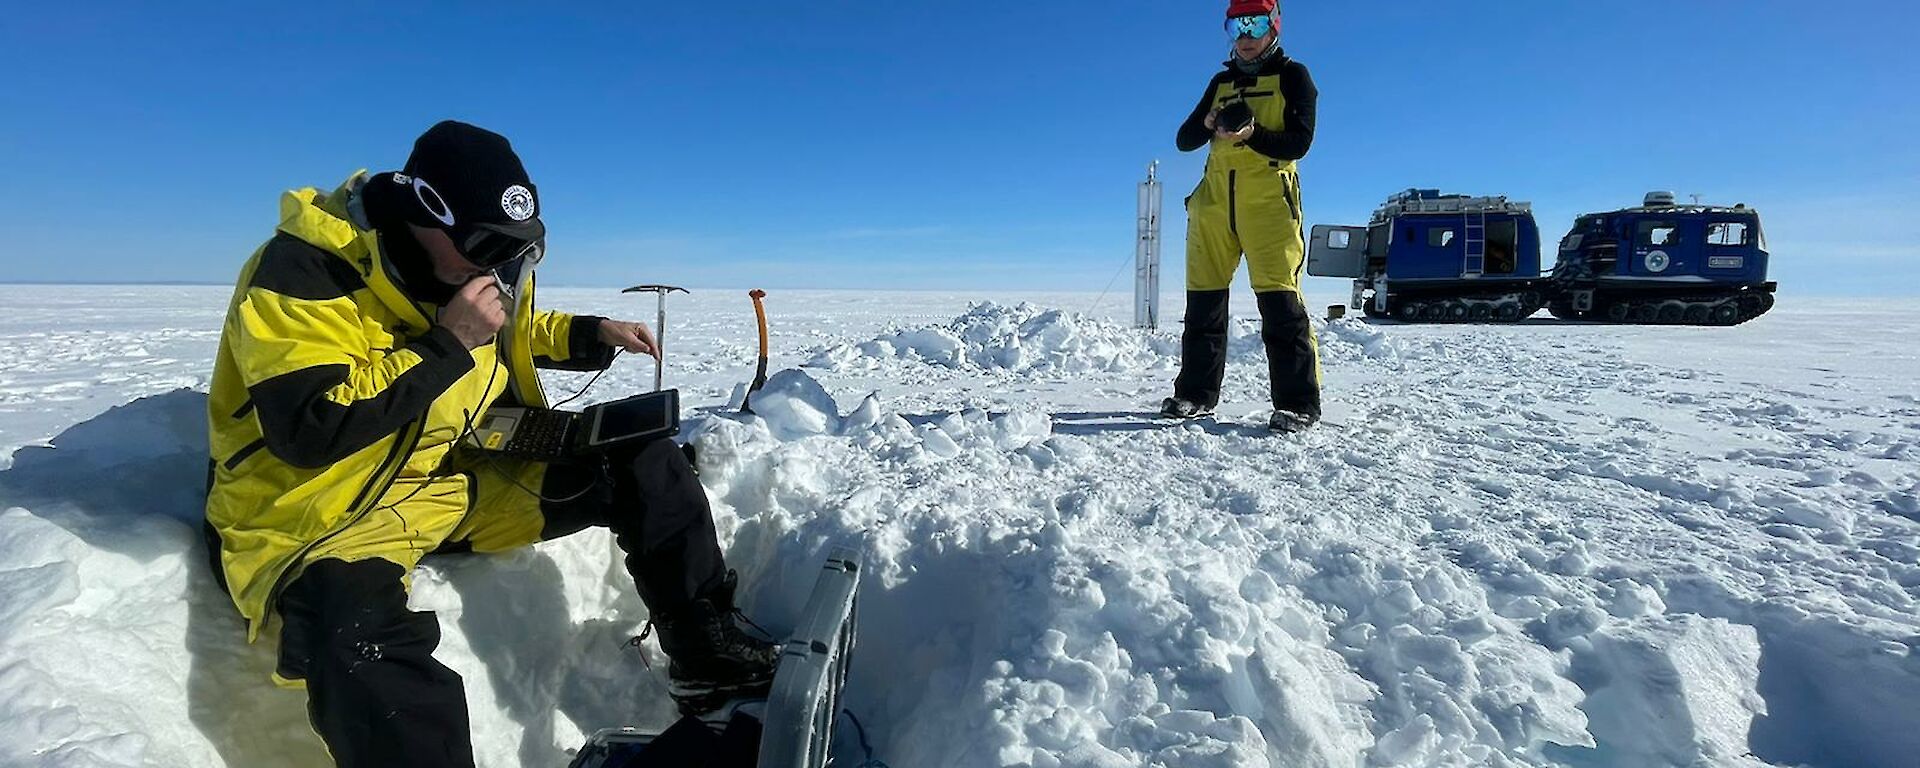 Scientists Tobias Stål and Anya Reading checking data on a field laptop buried in the snow. Blue Hagglunds vehicle in the background